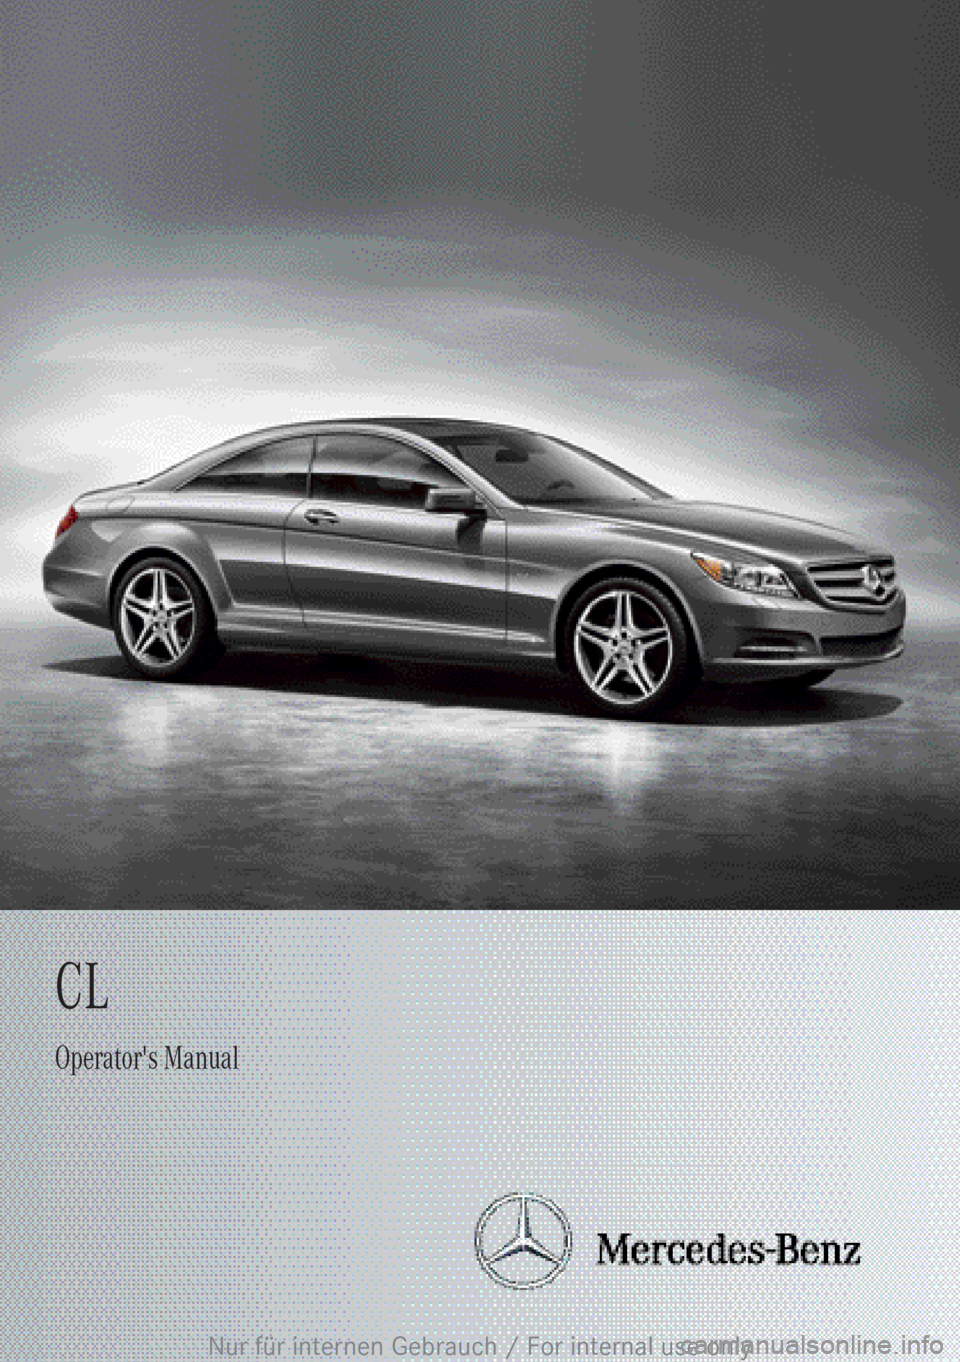 MERCEDES-BENZ CL CLASS 2013  Owners Manual CLOperator's Manual
Nur für internen Gebrauch / For internal use only 